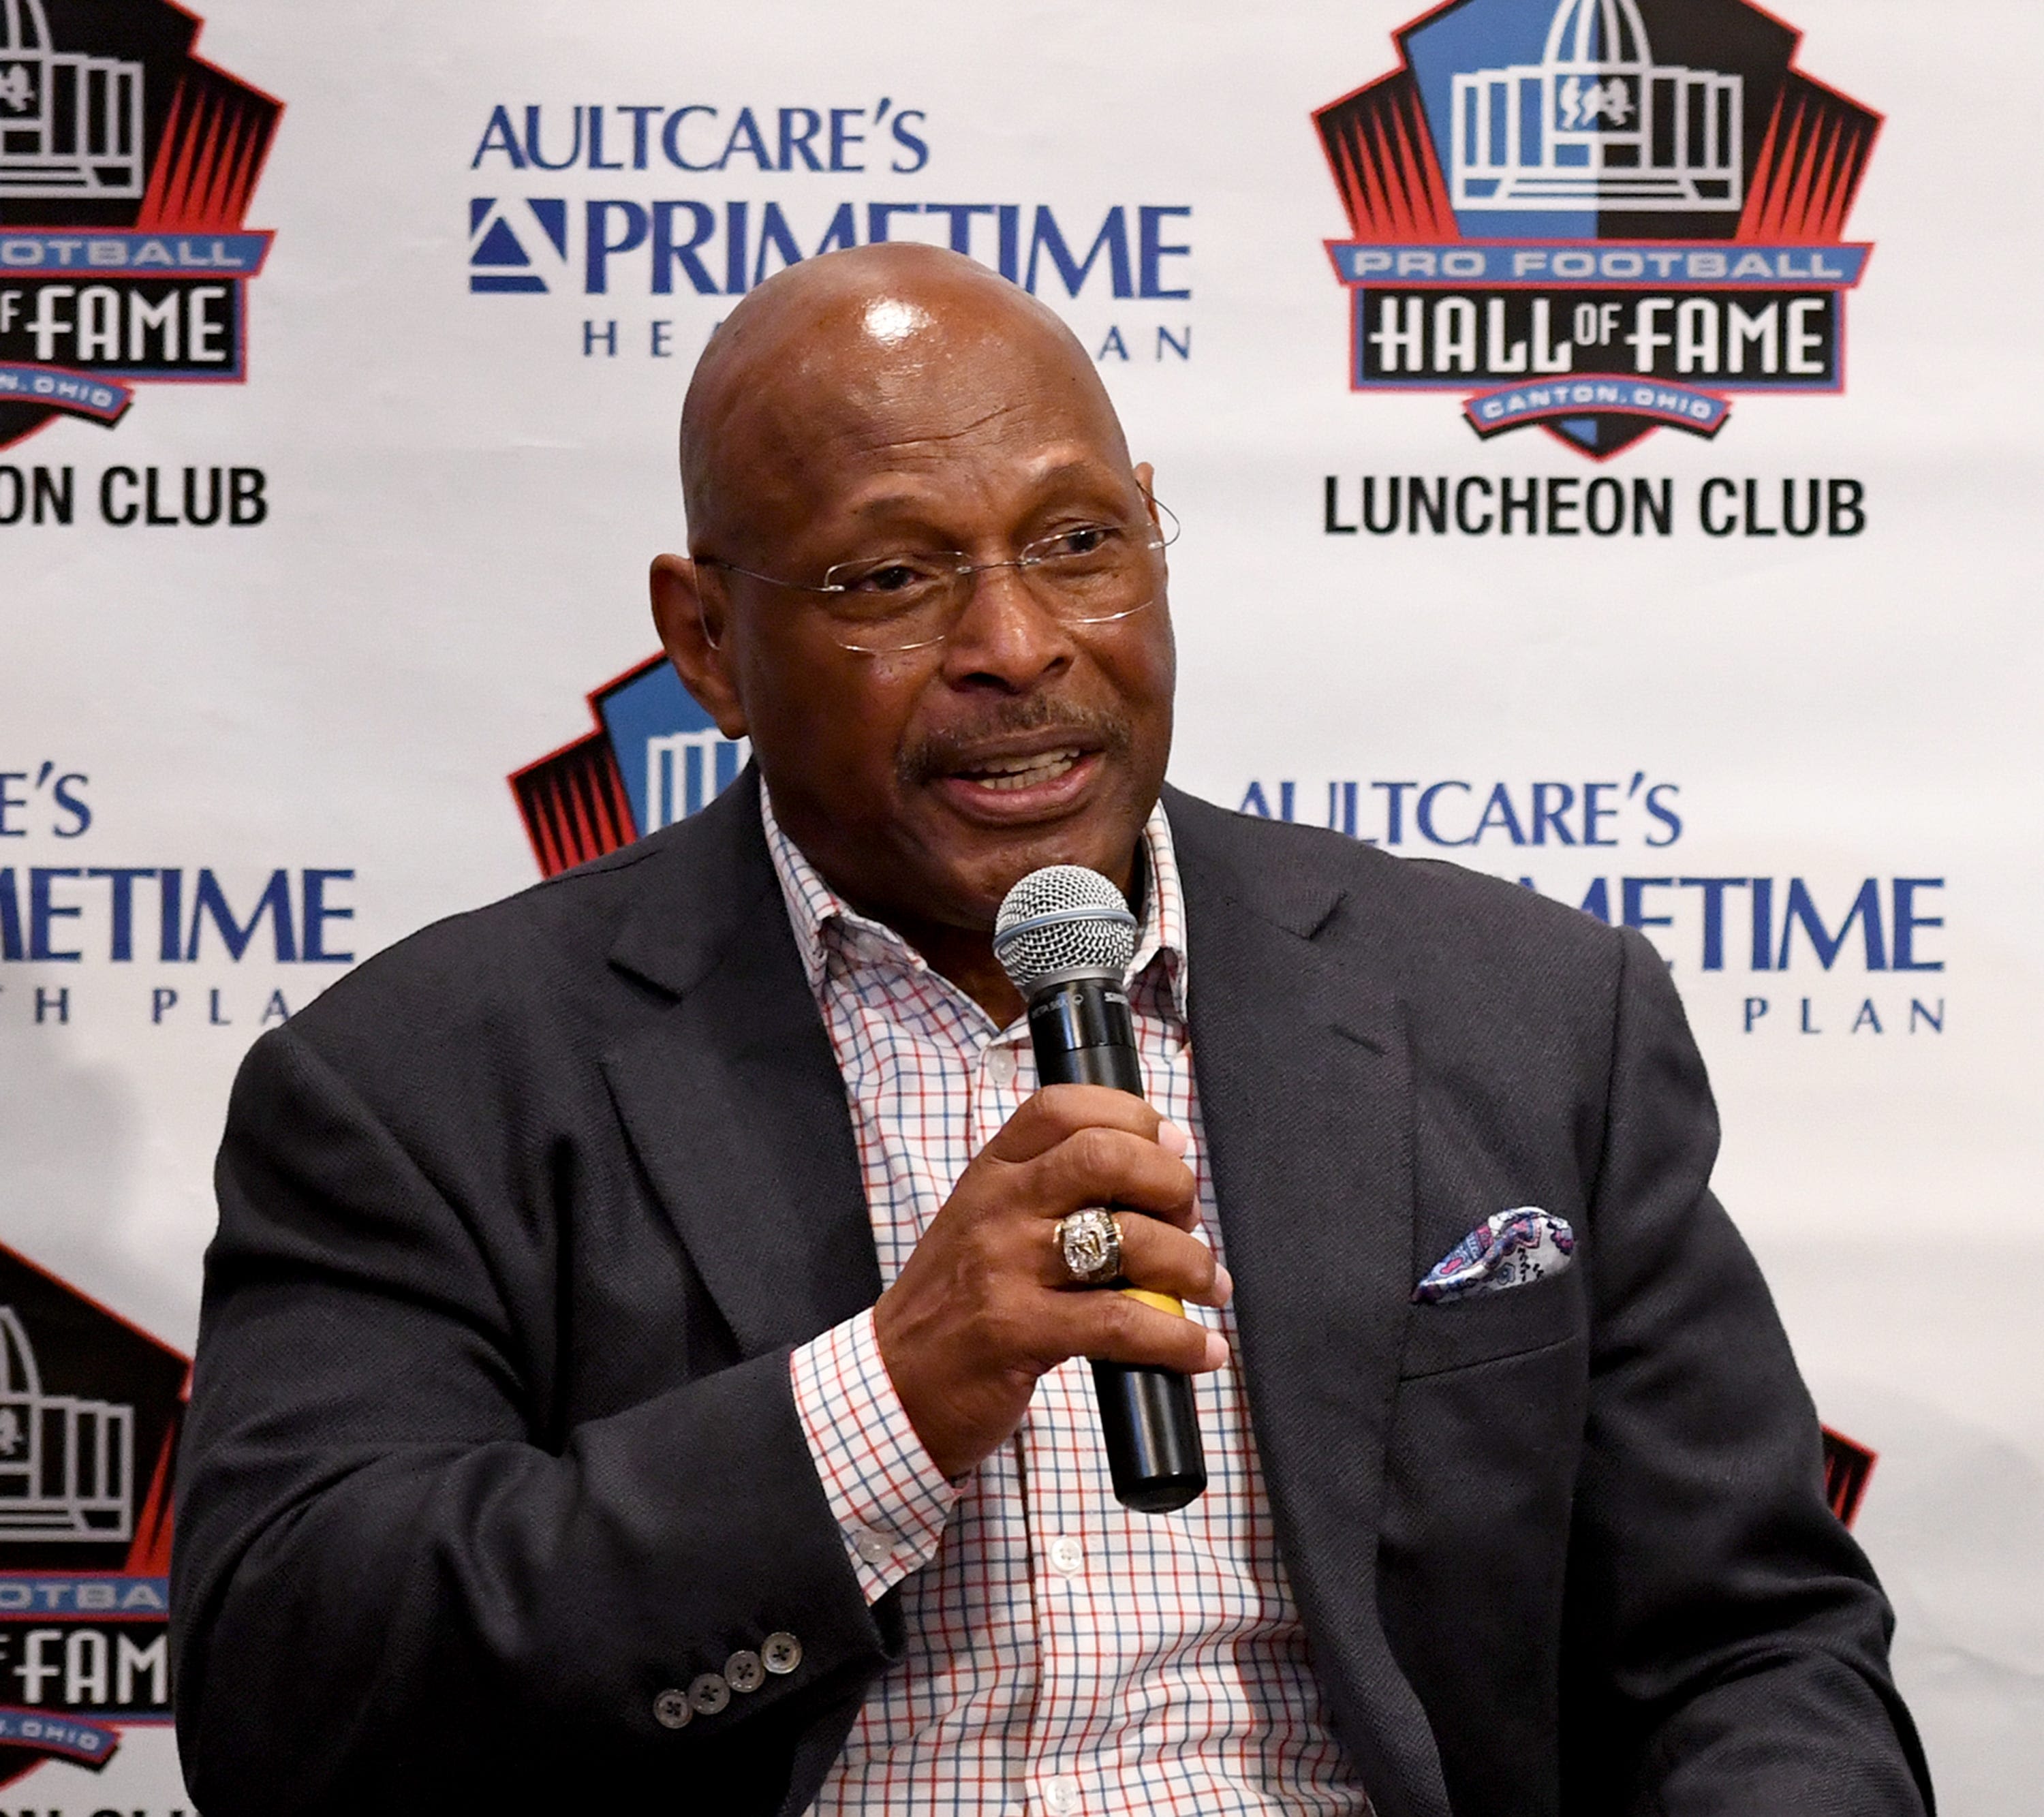 Ohio State legend Archie Griffin, who beat Michigan three times, steamed by 0-3 streak